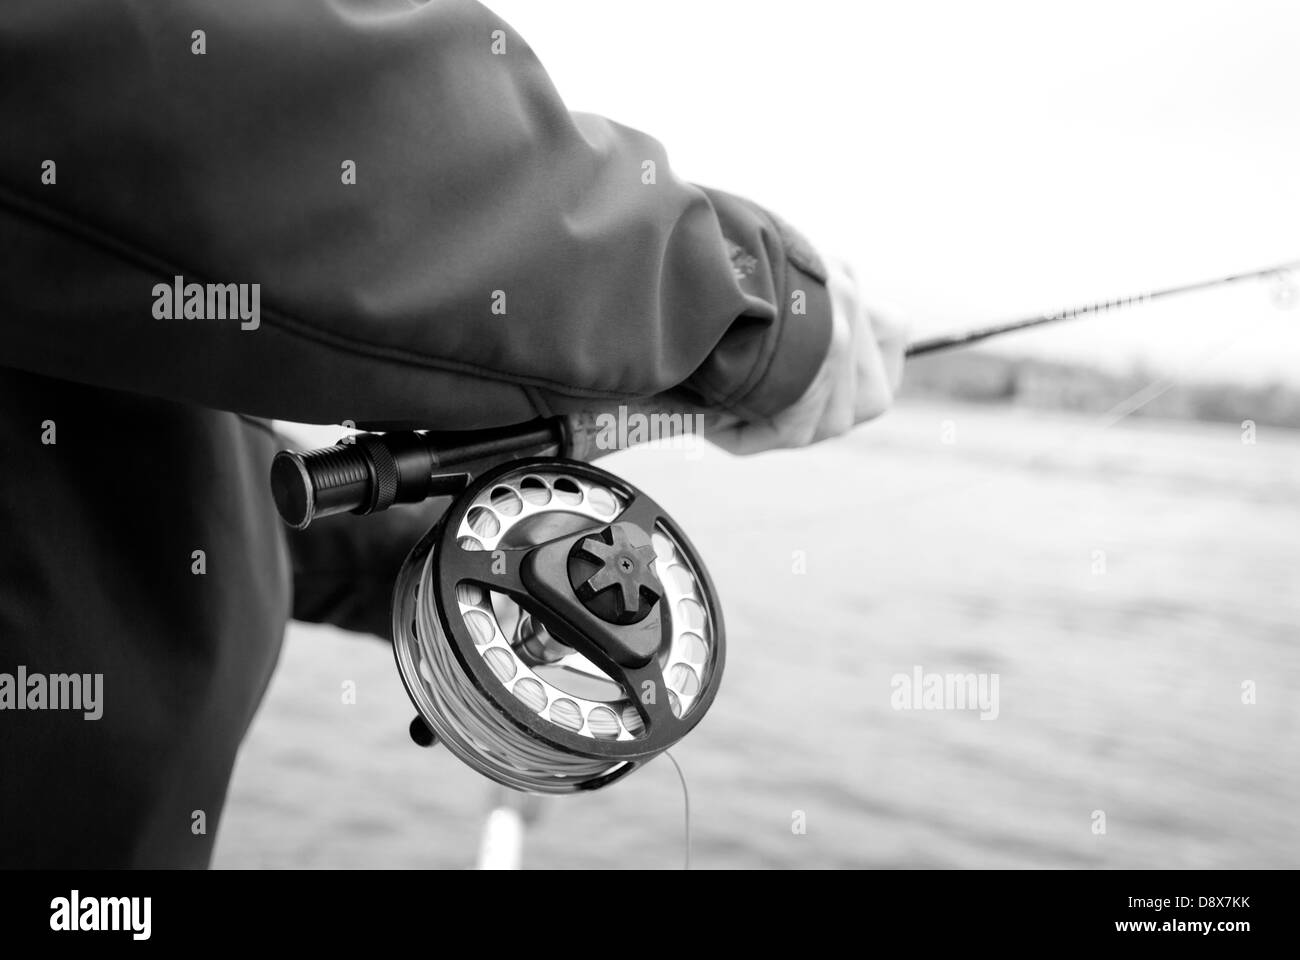 Fly fishing pole Black and White Stock Photos & Images - Alamy